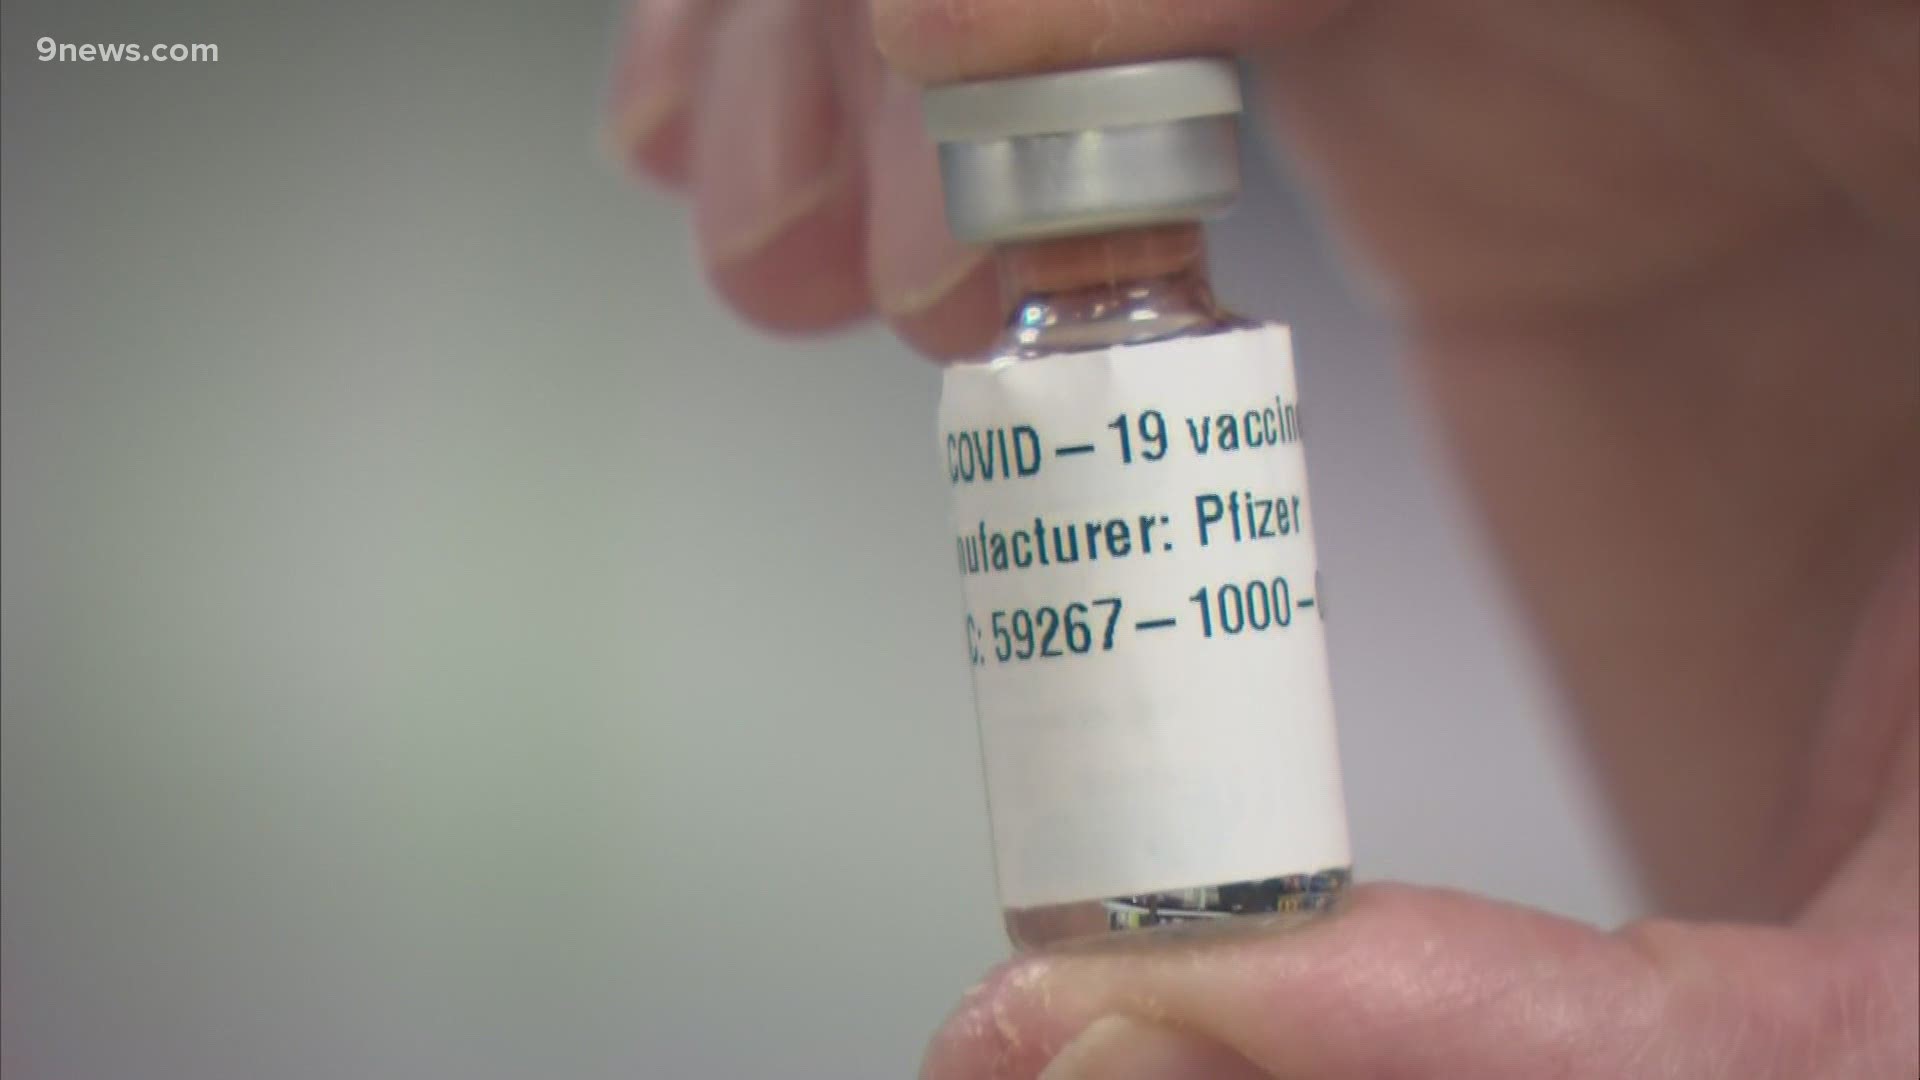 As Colorado healthcare workers expect to receive about 47,000 doses of COVID-19 vaccine next week, the state wants to make sure it can deliver those doses safely.